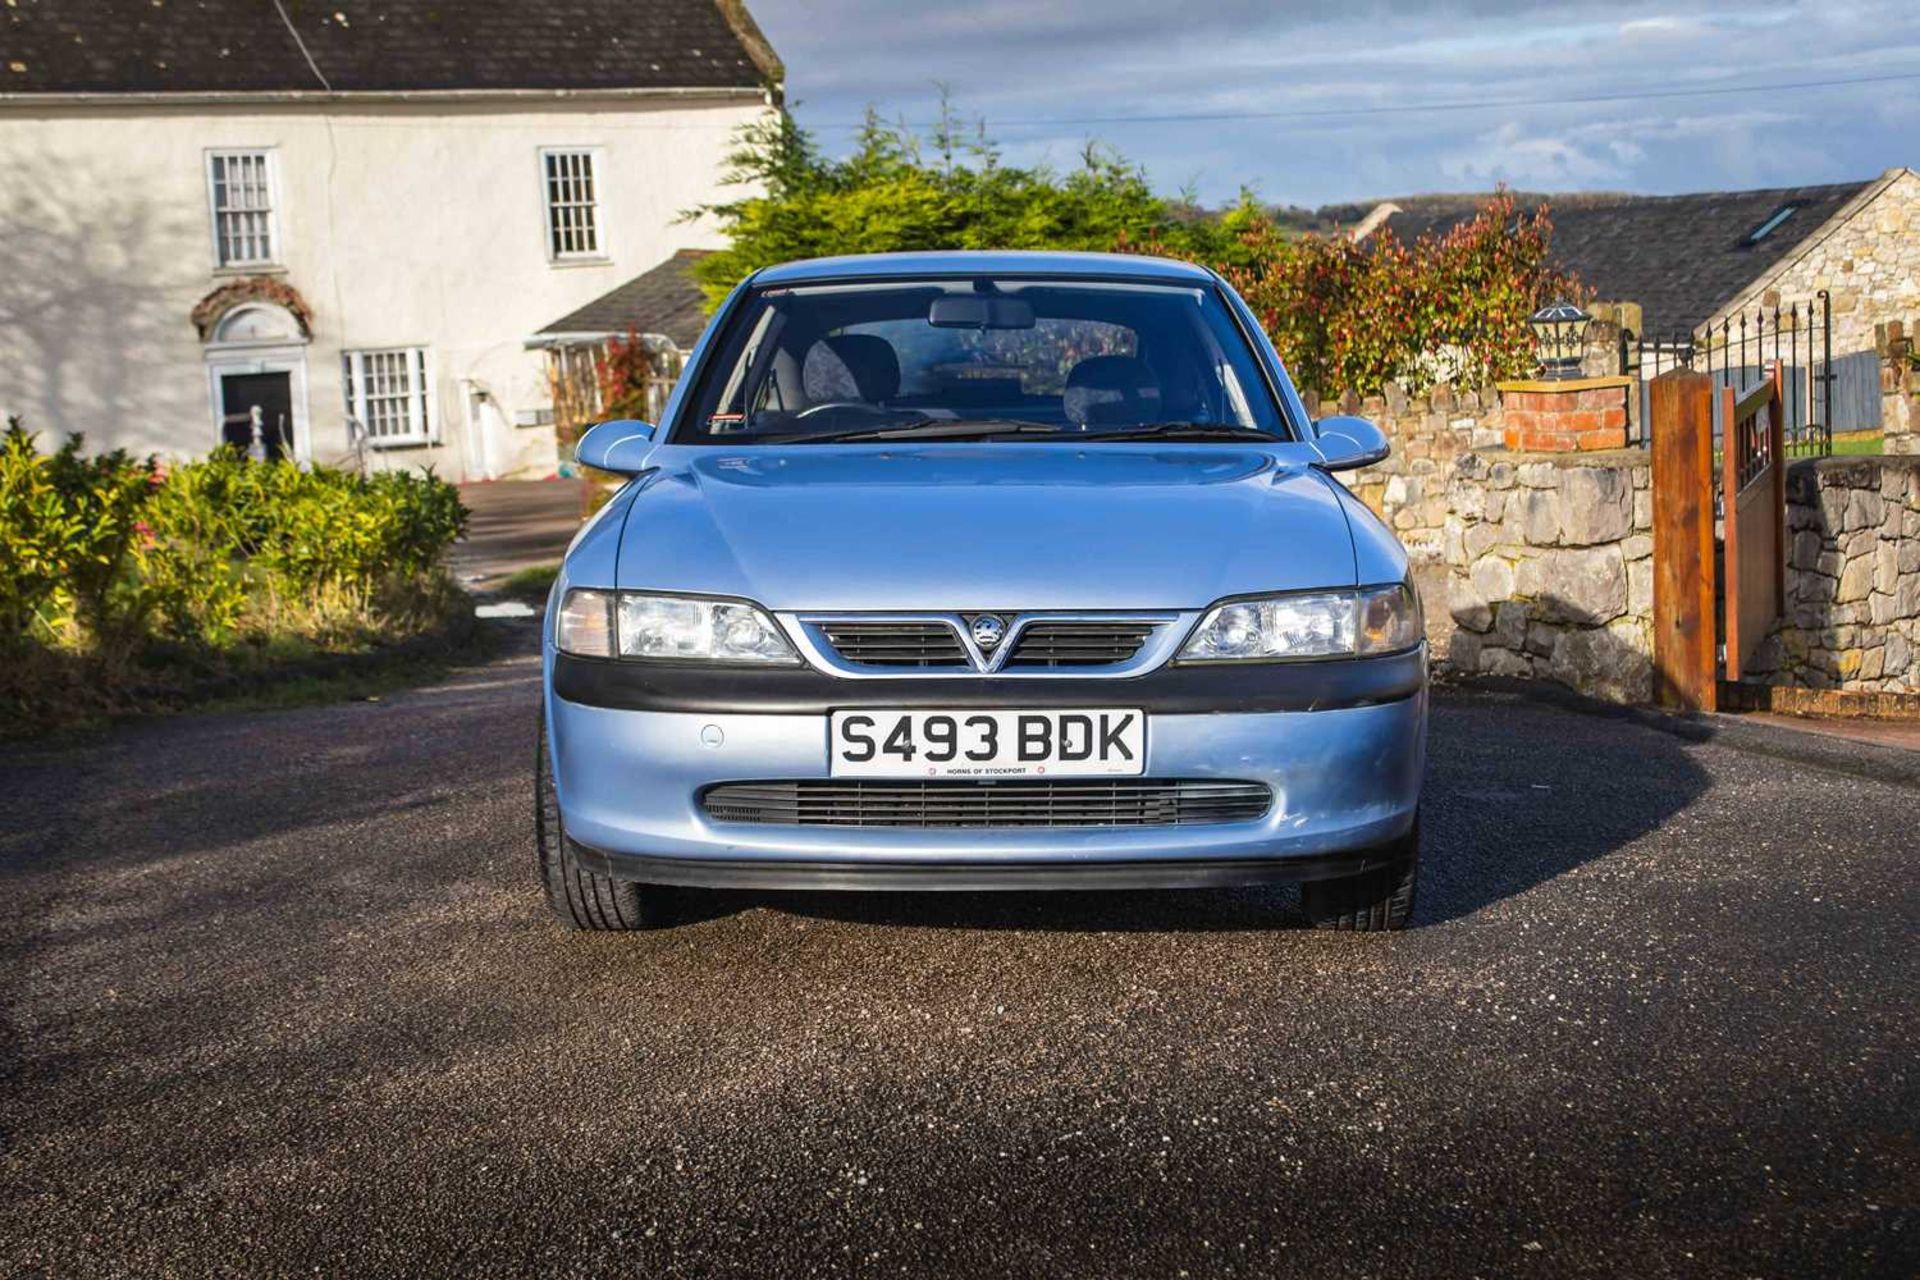 1998 Vauxhall Vectra 1.6 Envoy Automatic transmission and only 25,000 miles from new ***NO RESERVE** - Image 2 of 93